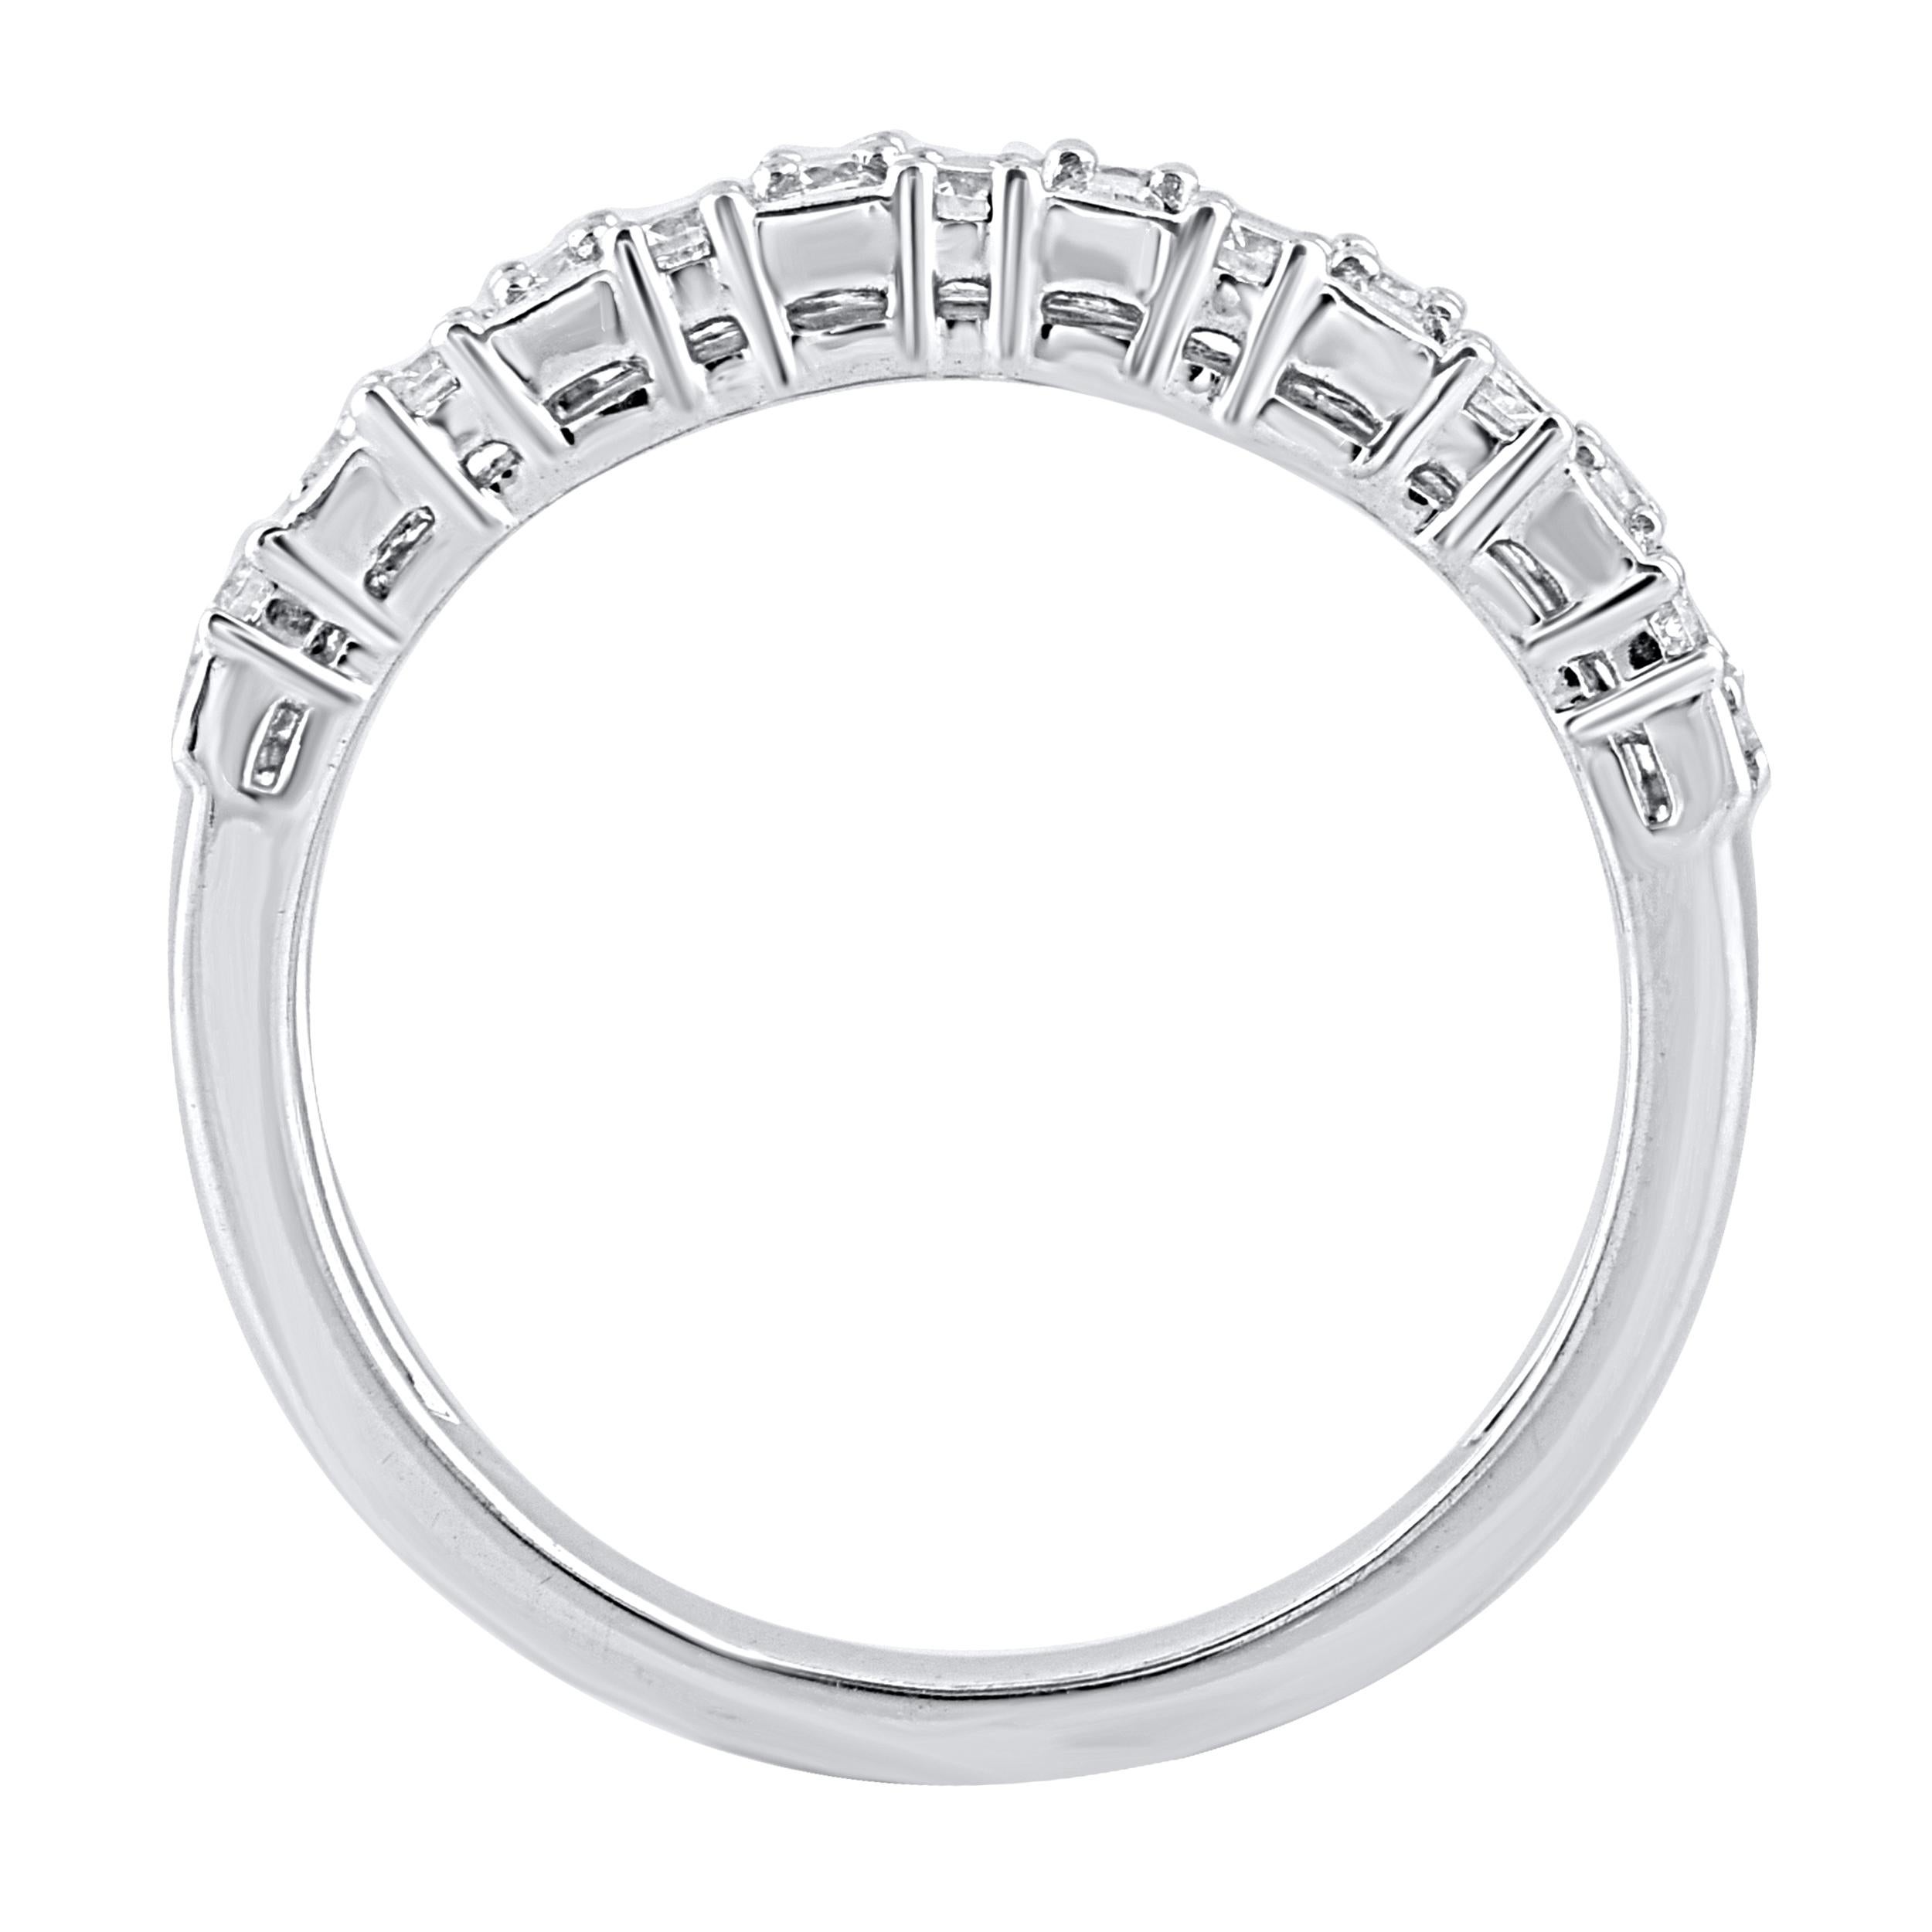 This beautiful engagement band ring features shimmering baguette diamonds and brilliant cut round diamonds in prong and channel setting. Crafted in 14 karat white gold. The ring is studded with a total of 30 baguette cut and brilliant cut natural